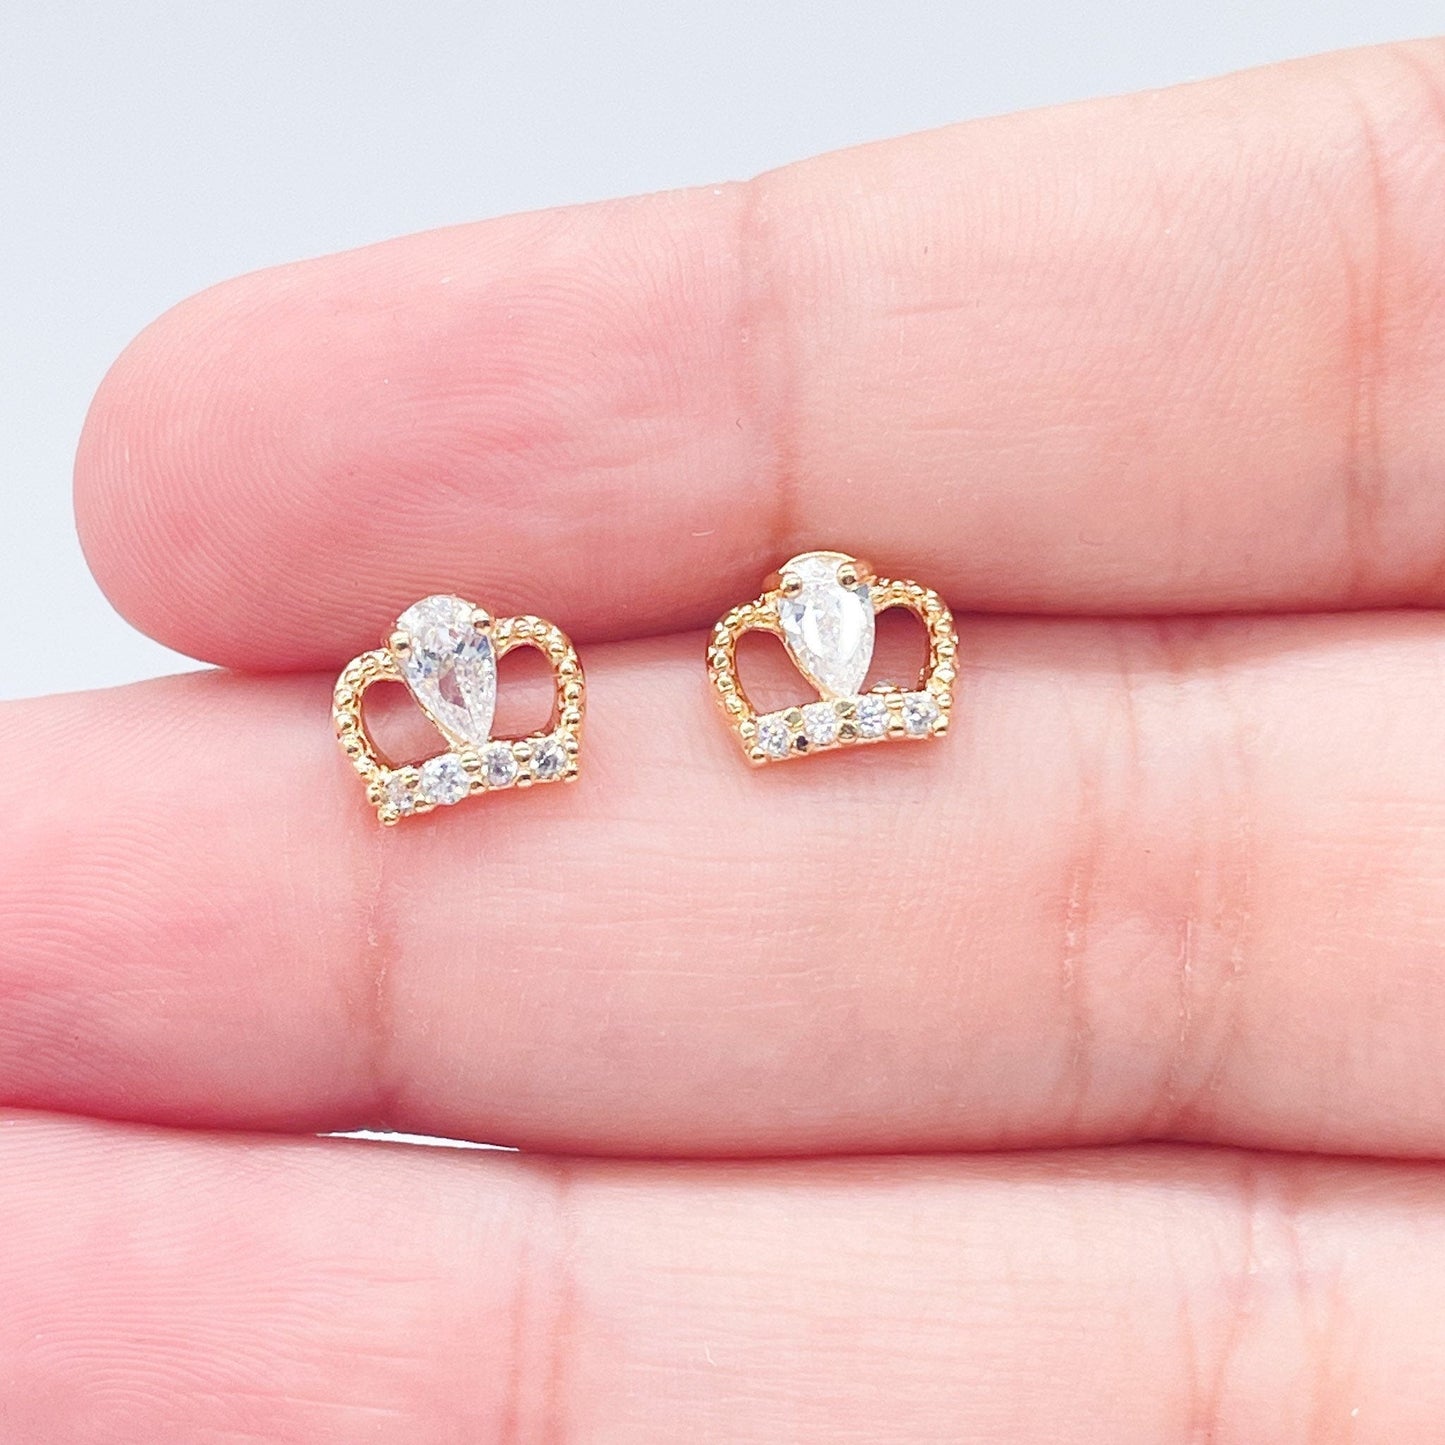 18k Gold Layered Small Crown Cubic Zirconia Stud Earrings Dainty Jewelry